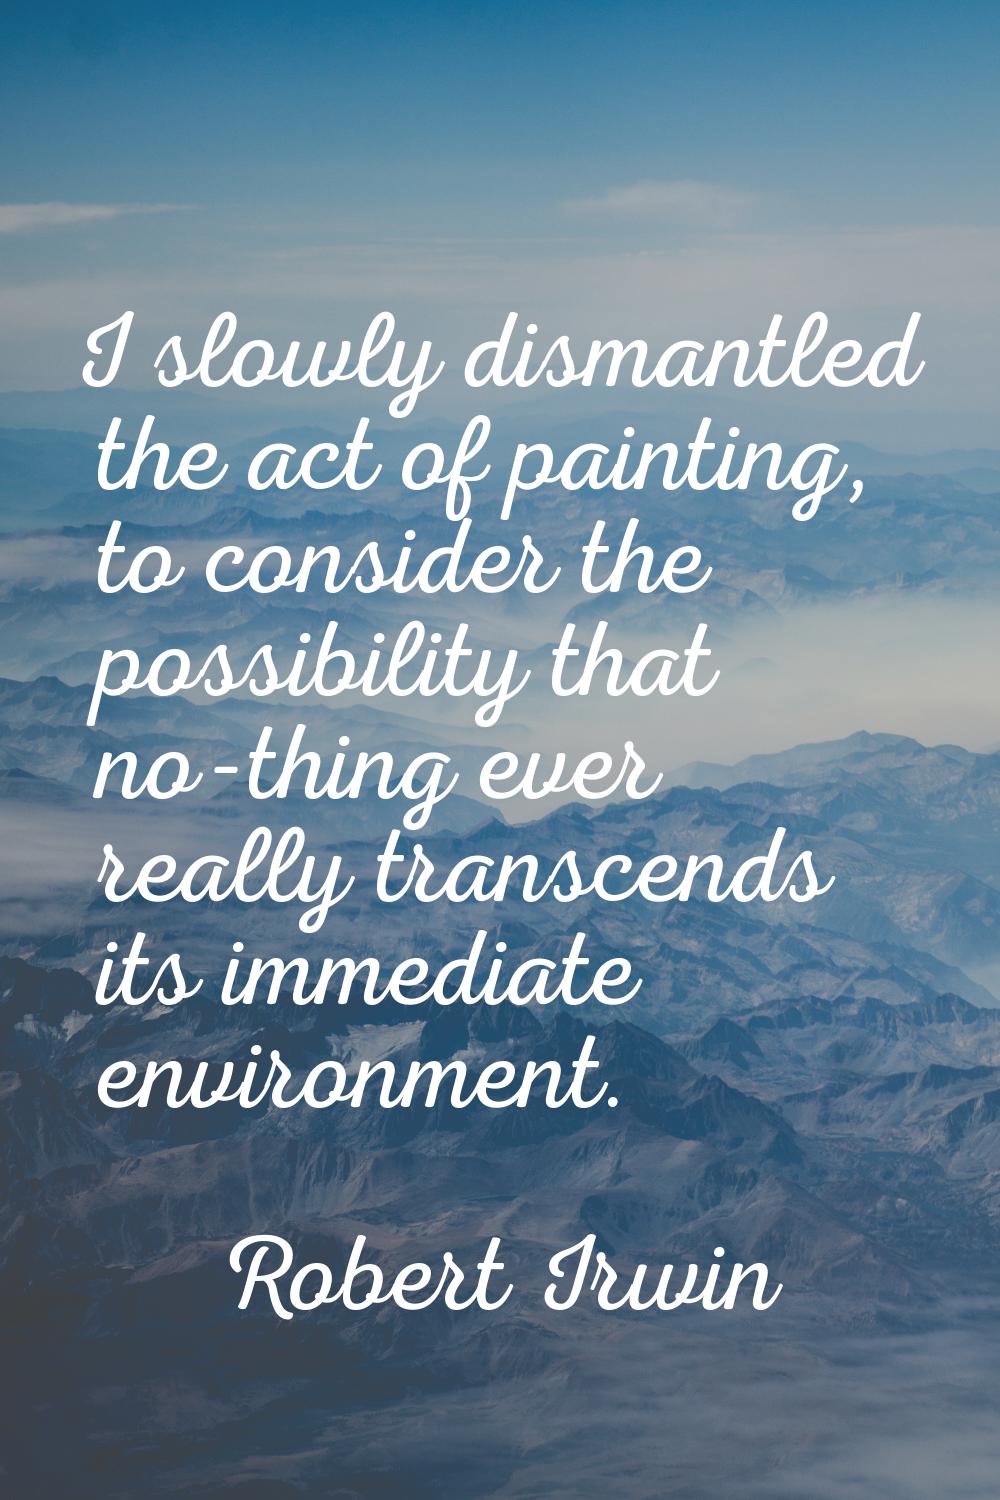 I slowly dismantled the act of painting, to consider the possibility that no-thing ever really tran